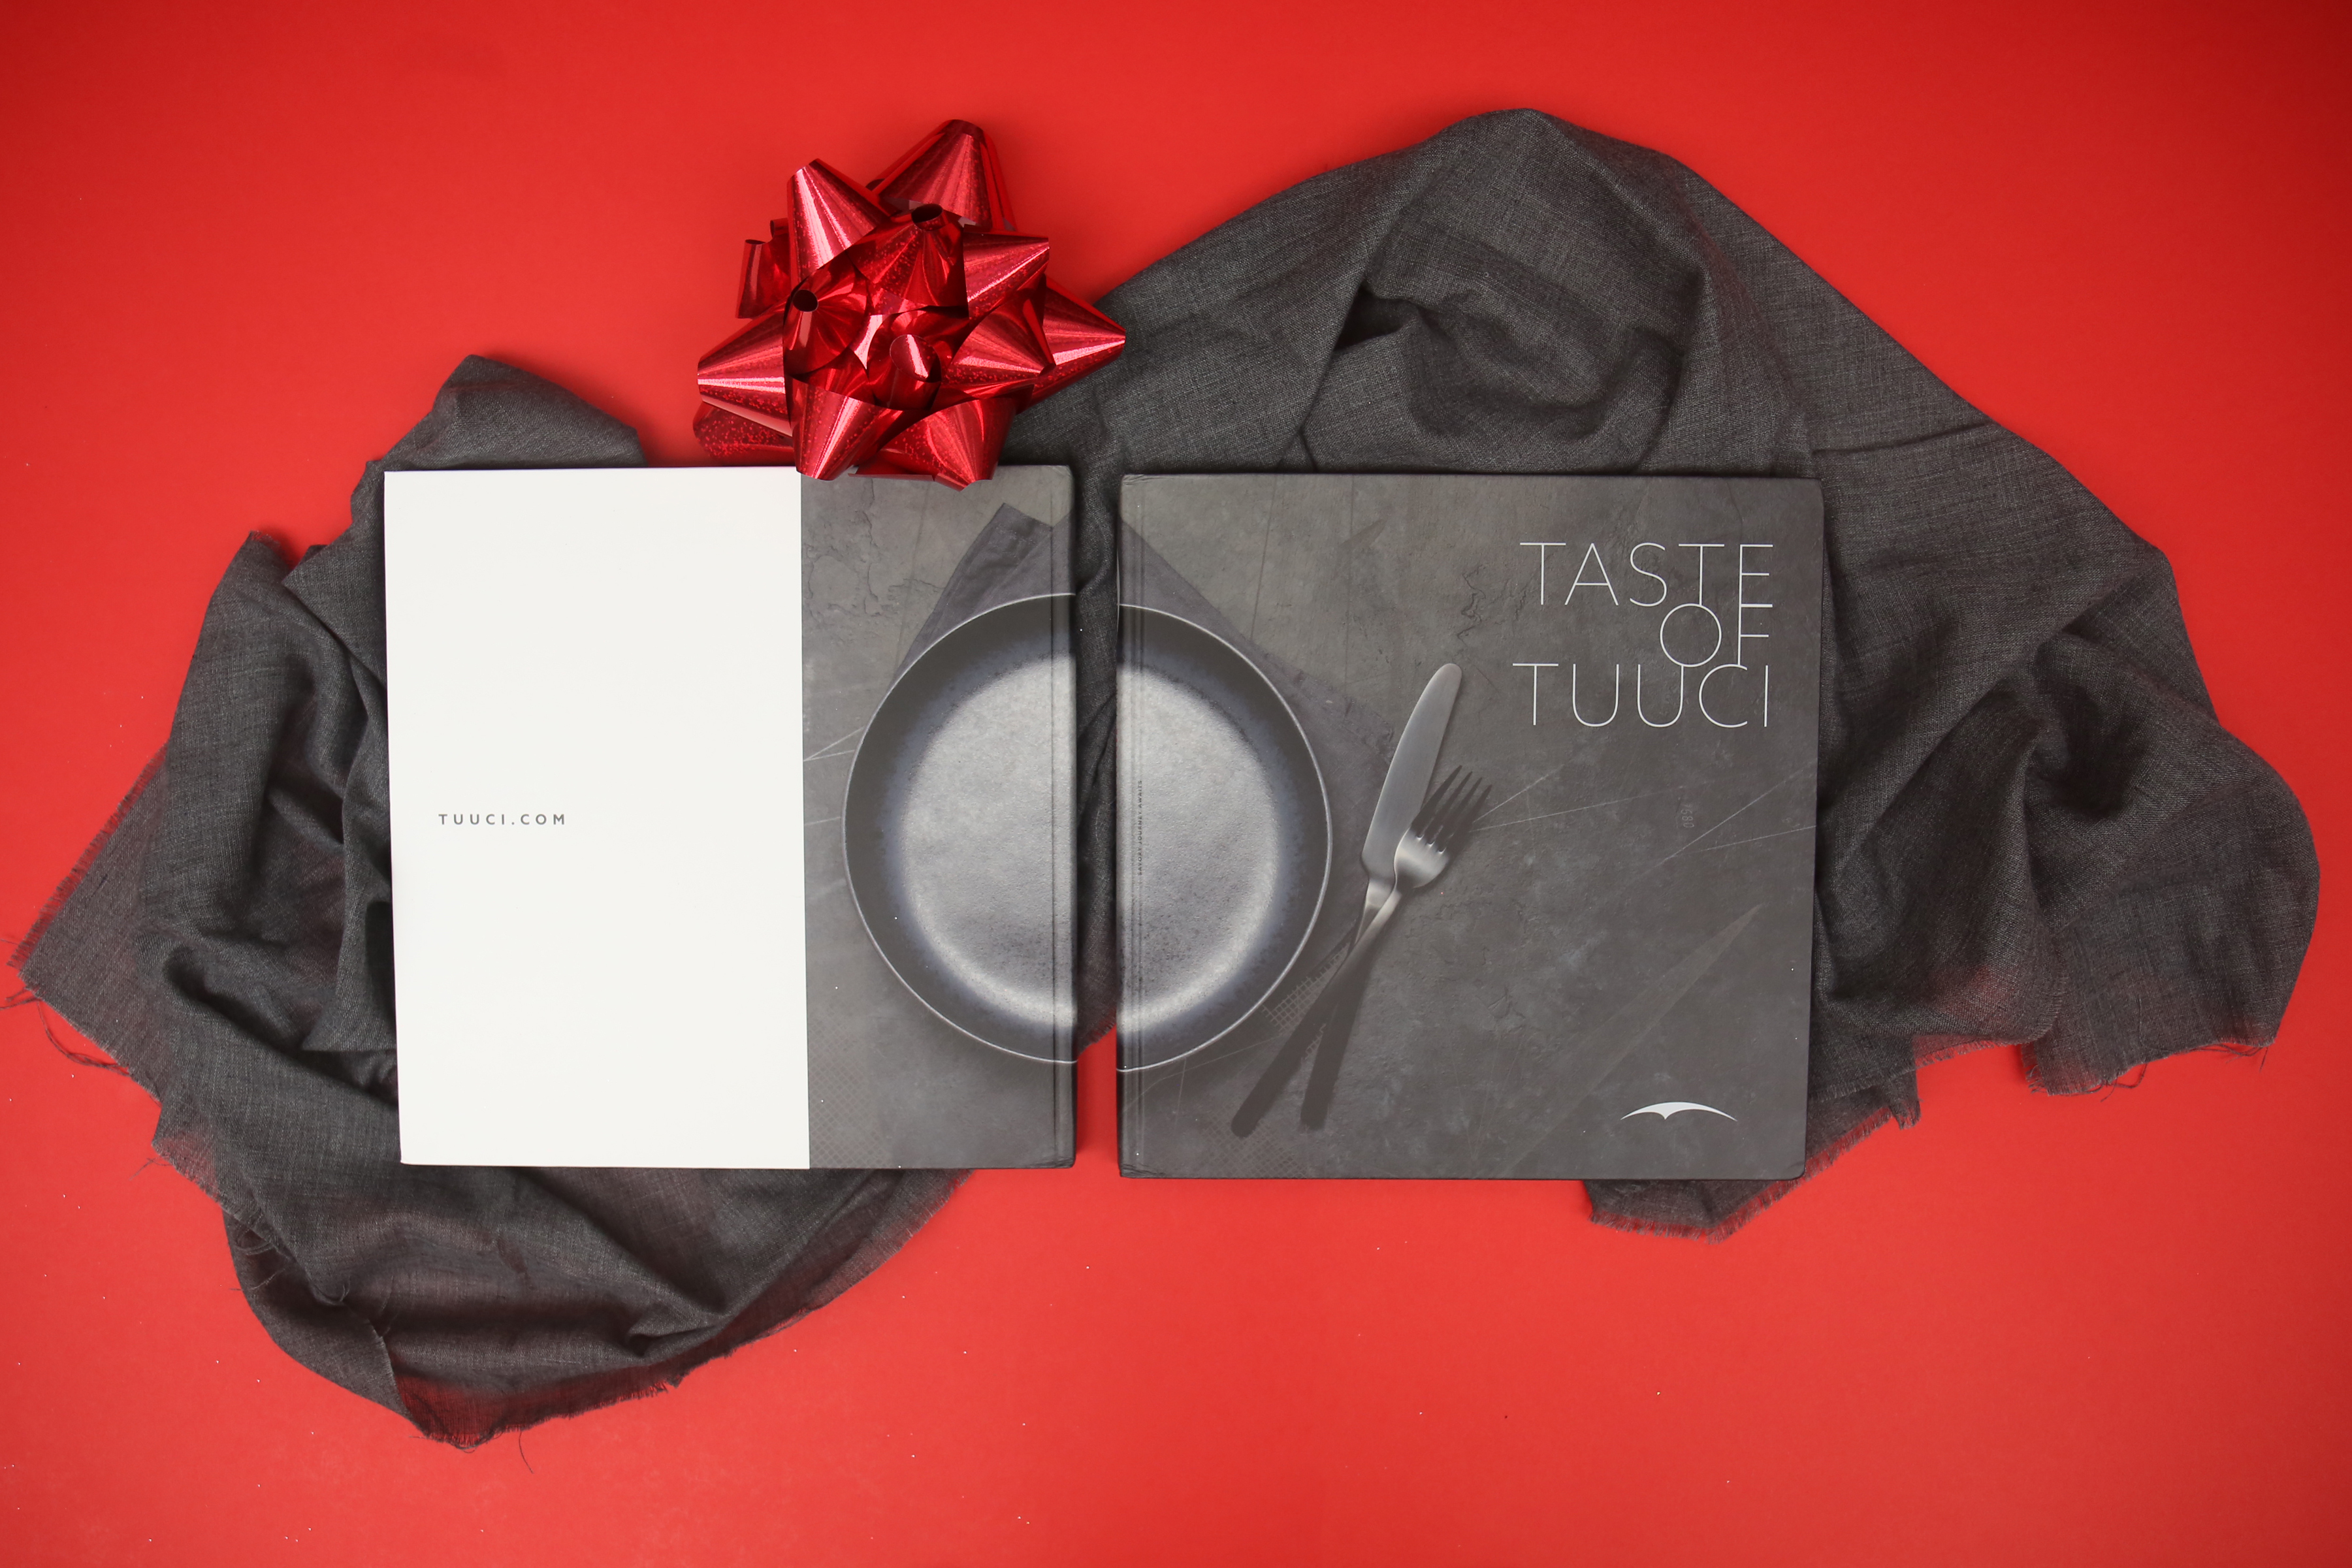 the front and back of the cookbook on a red background with a bow